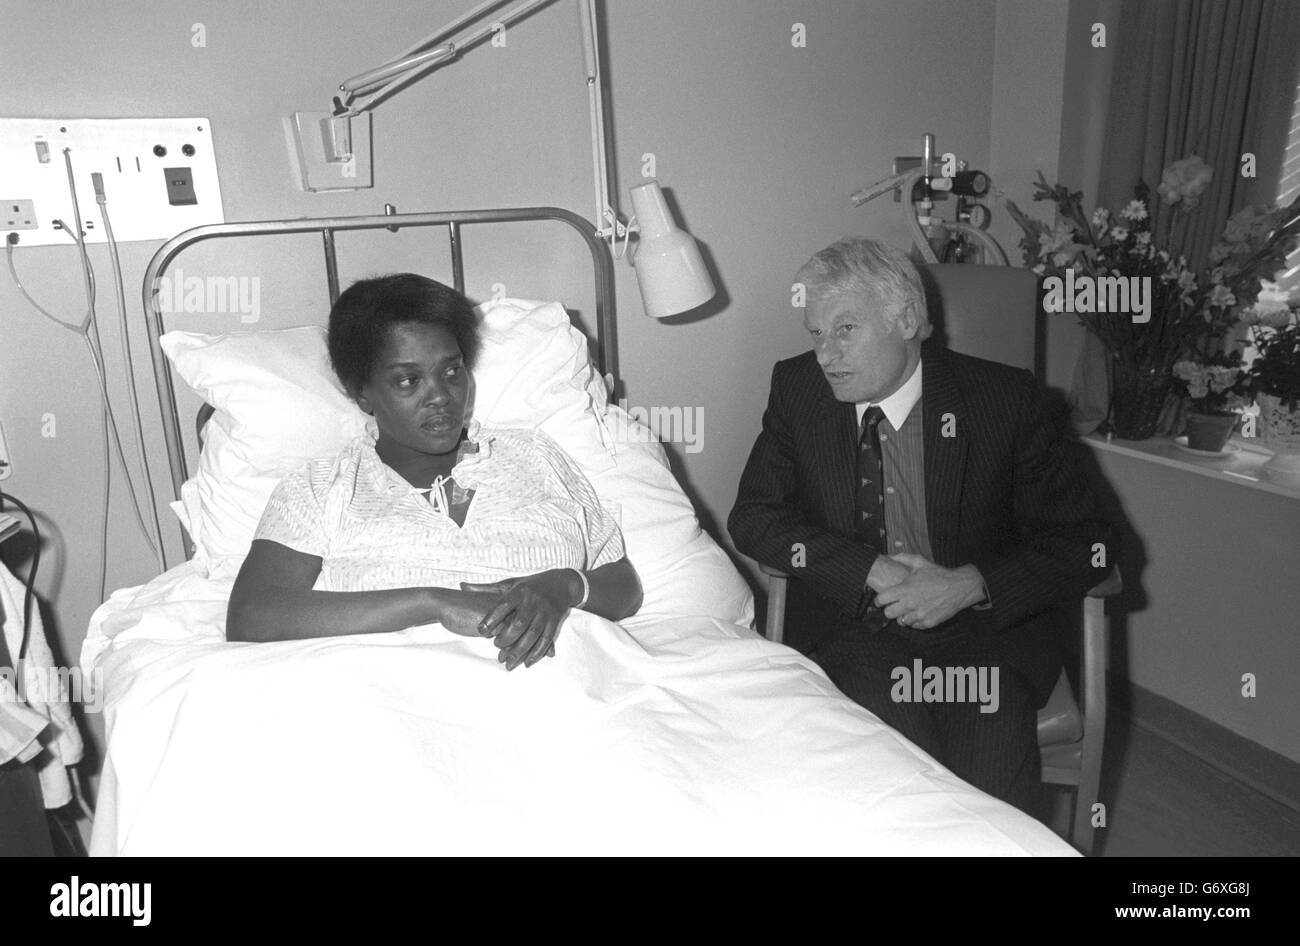 Assistant Chief Constable of West Yorkshire John Domaille at the bedside of Cherry Groce in St Thomas' Hospital, London, who he visited for the first time since she was accidentally shot by police in Brixton, south London 10 days ago. Mr Domaille is investigating the shooting. Stock Photo